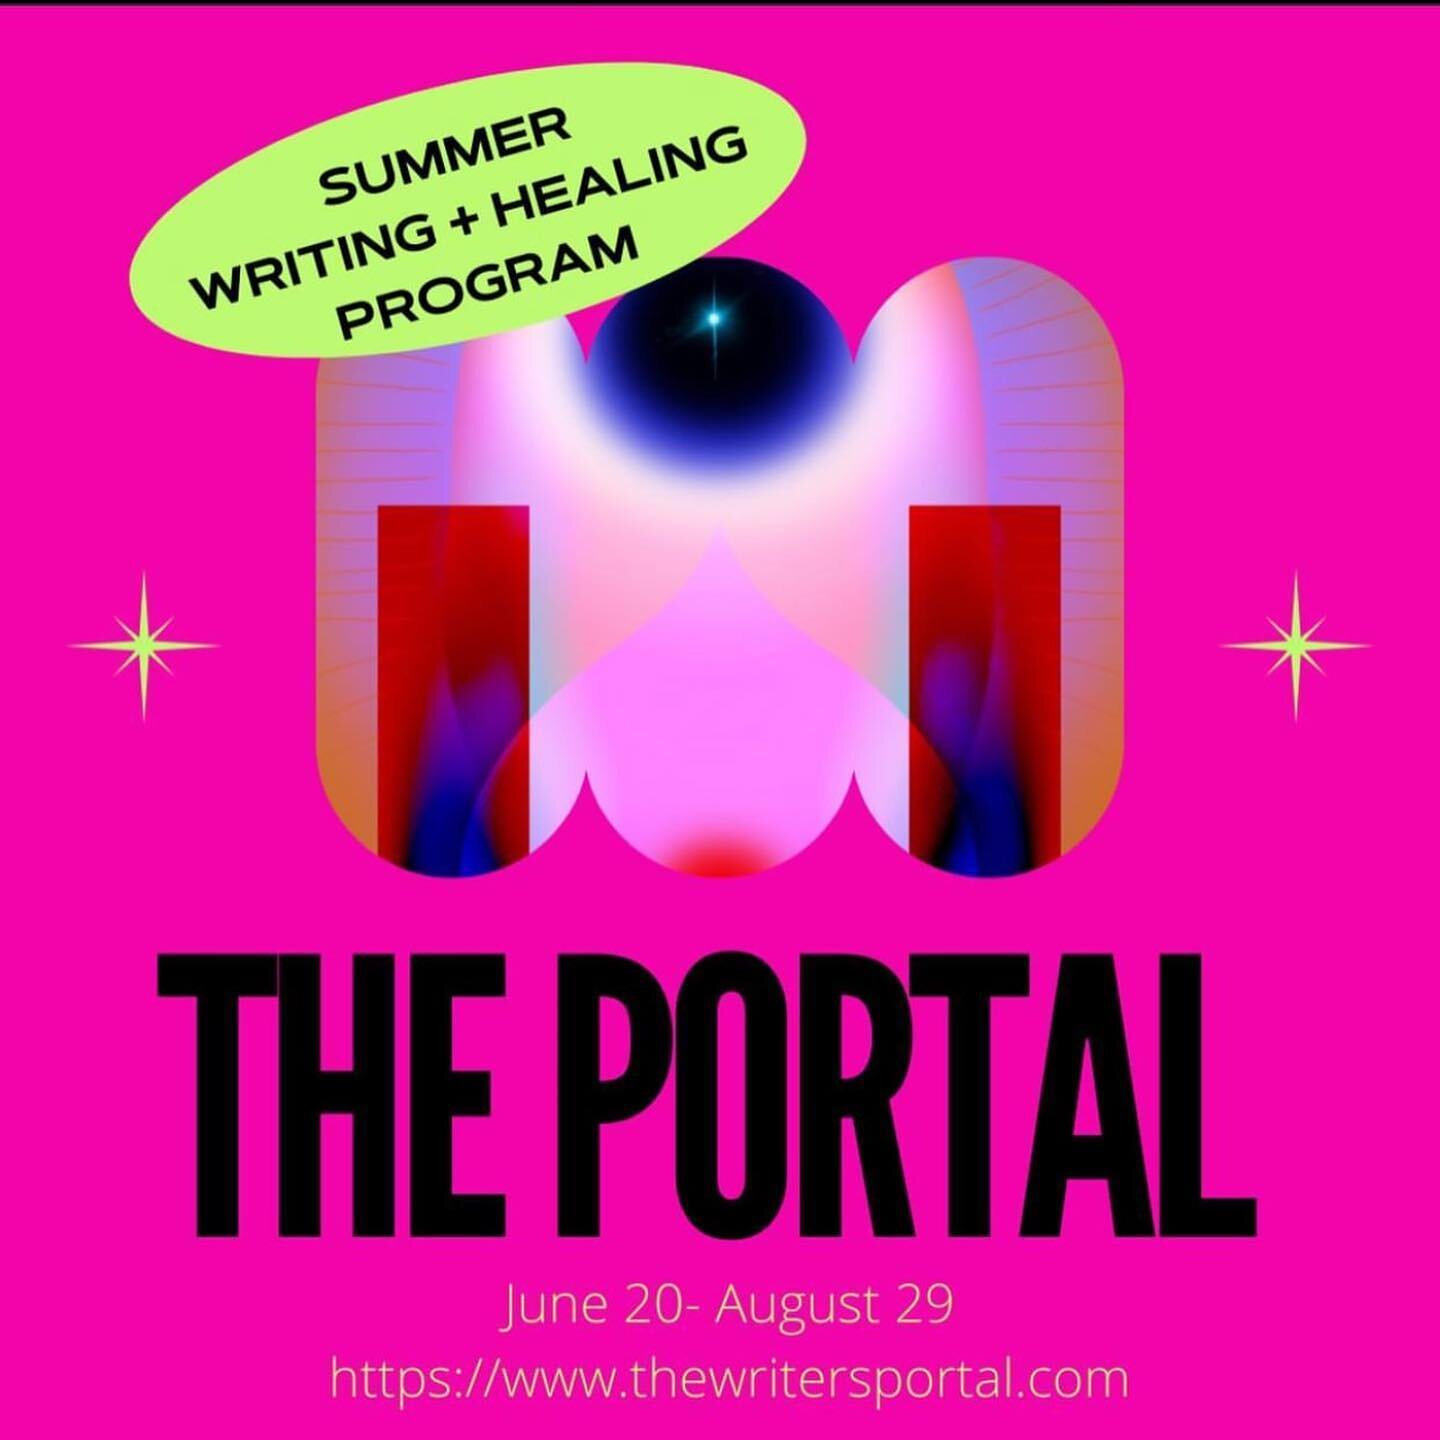 OMG The Portal is Closed! And of course I forgot to take a closing picture 📸 Thank you @move.with.love @bobholman @leonoradesar @francescaliablock @dynastyelectrik for popping in and guest teaching and thank you to all the amazing writers who wrote 